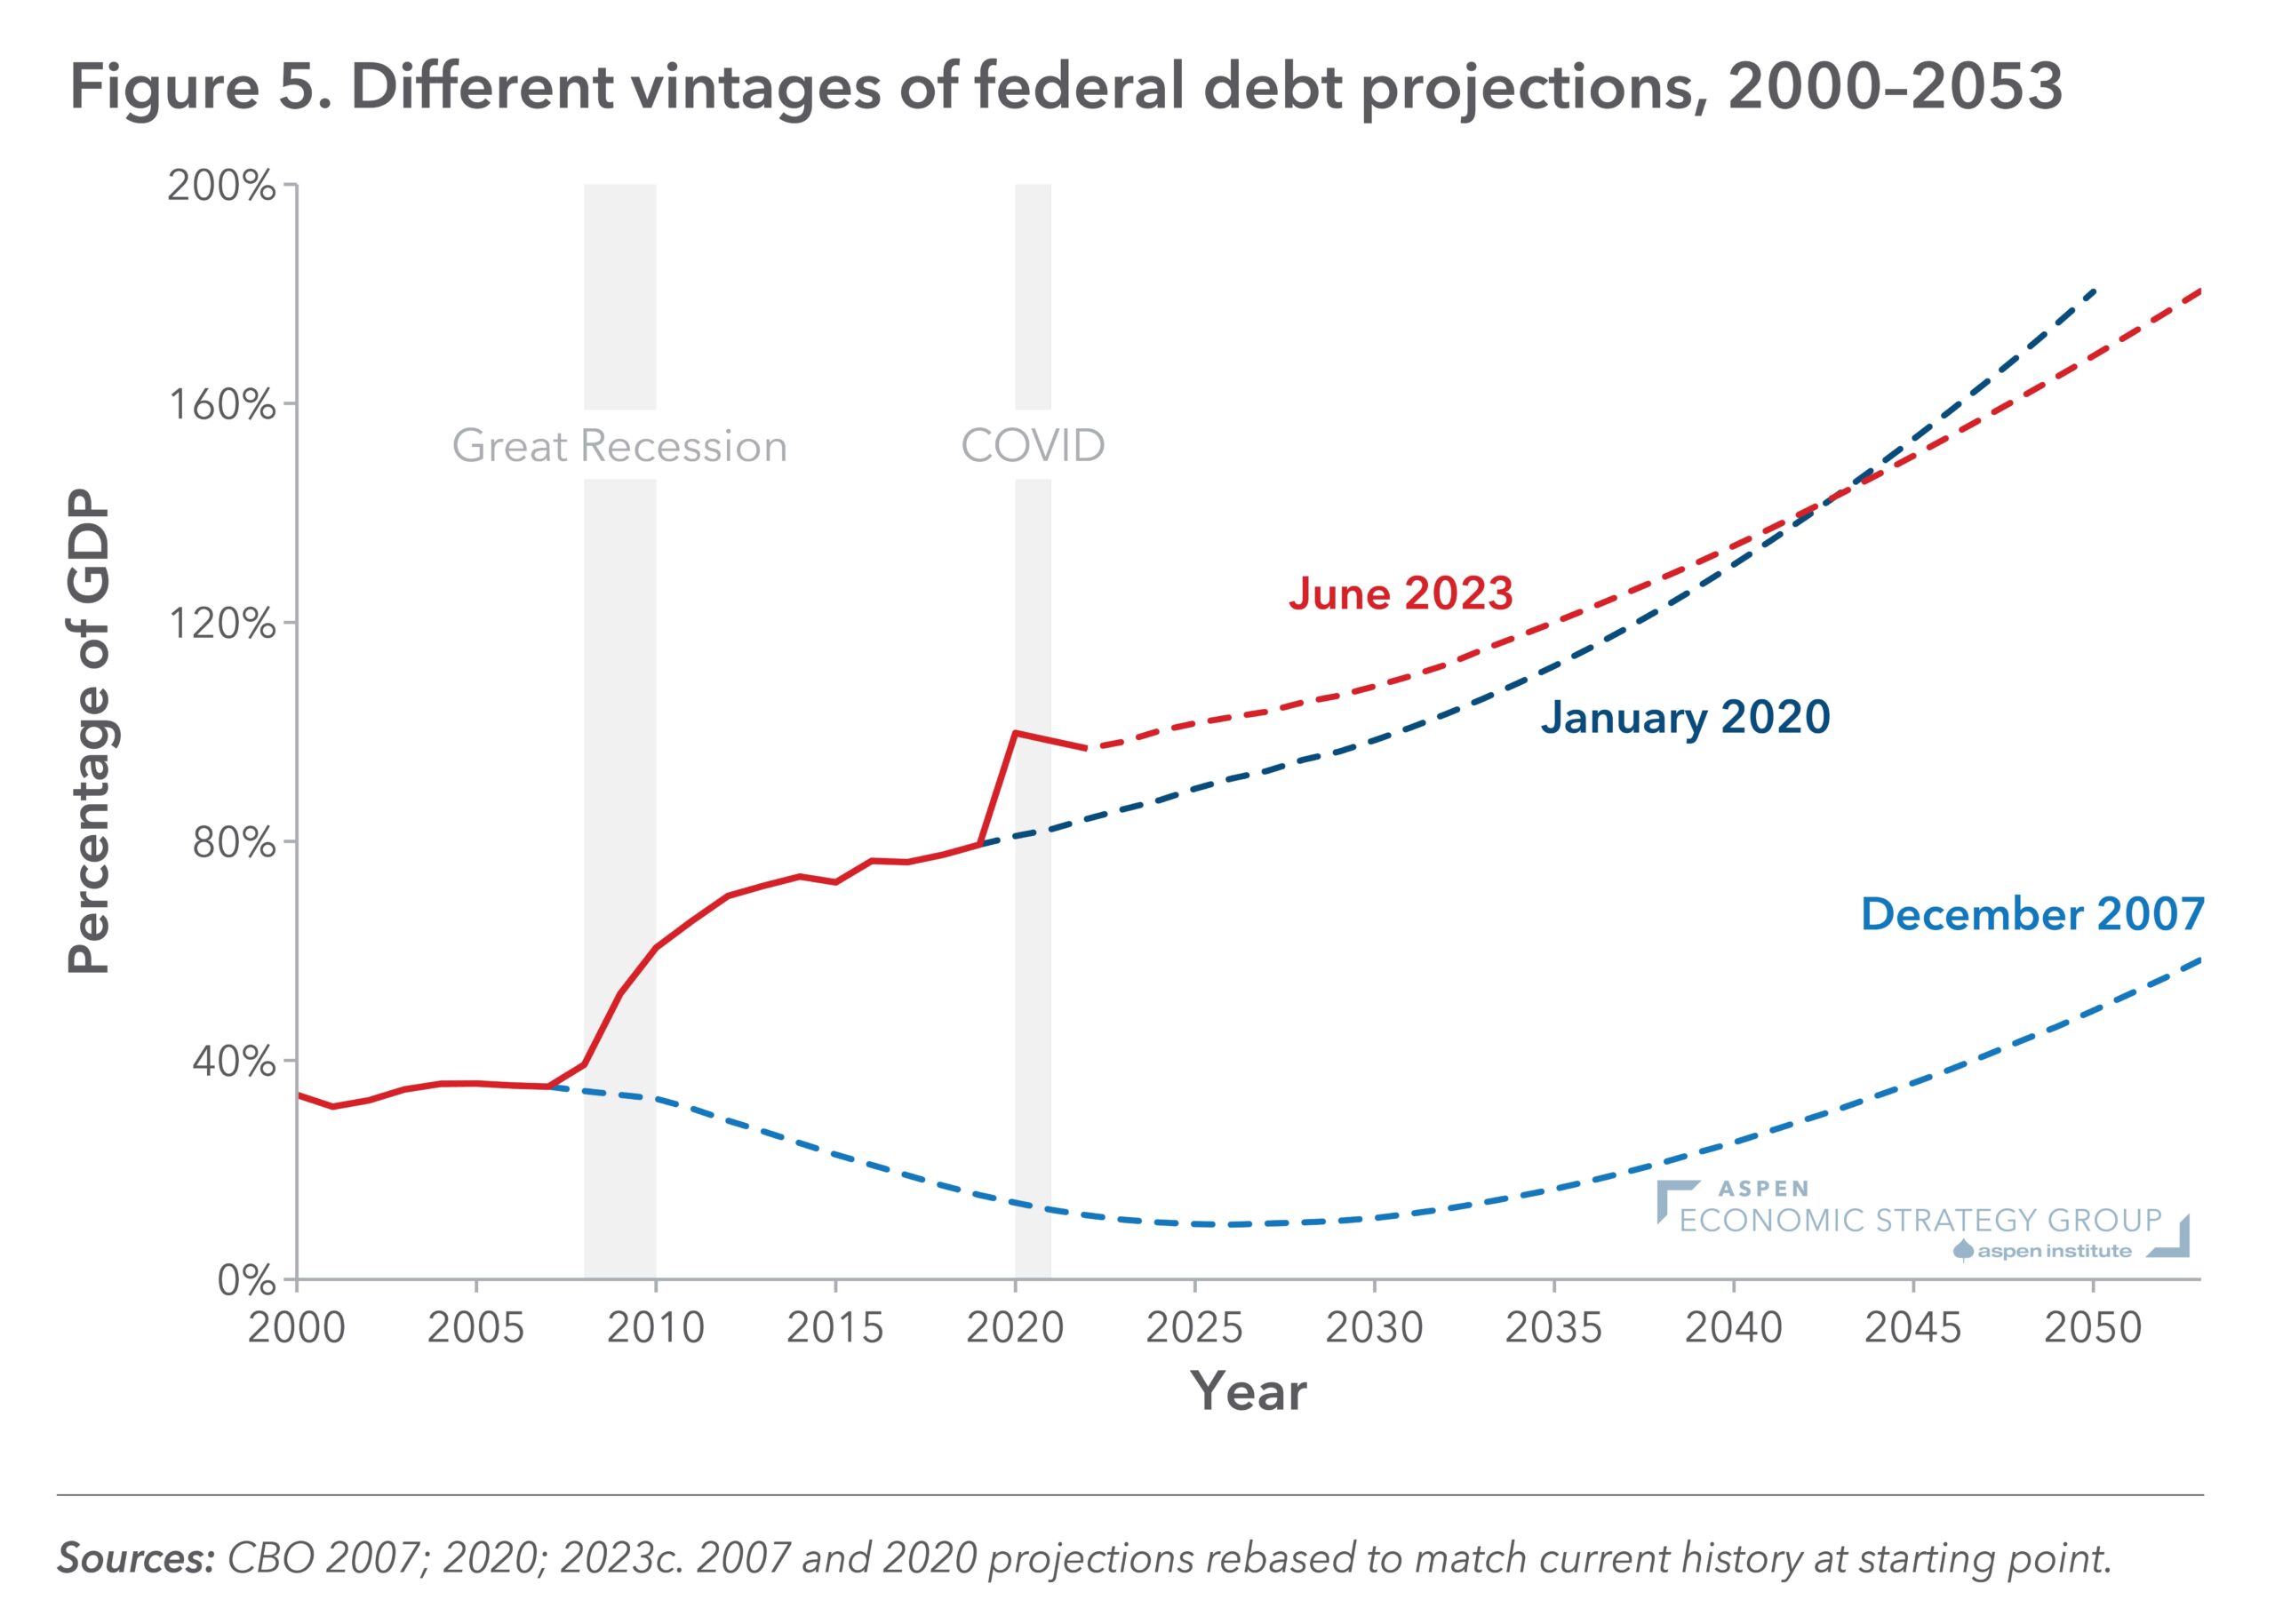 Figure 5: Different vintages of federal debt projections, 2000-2053